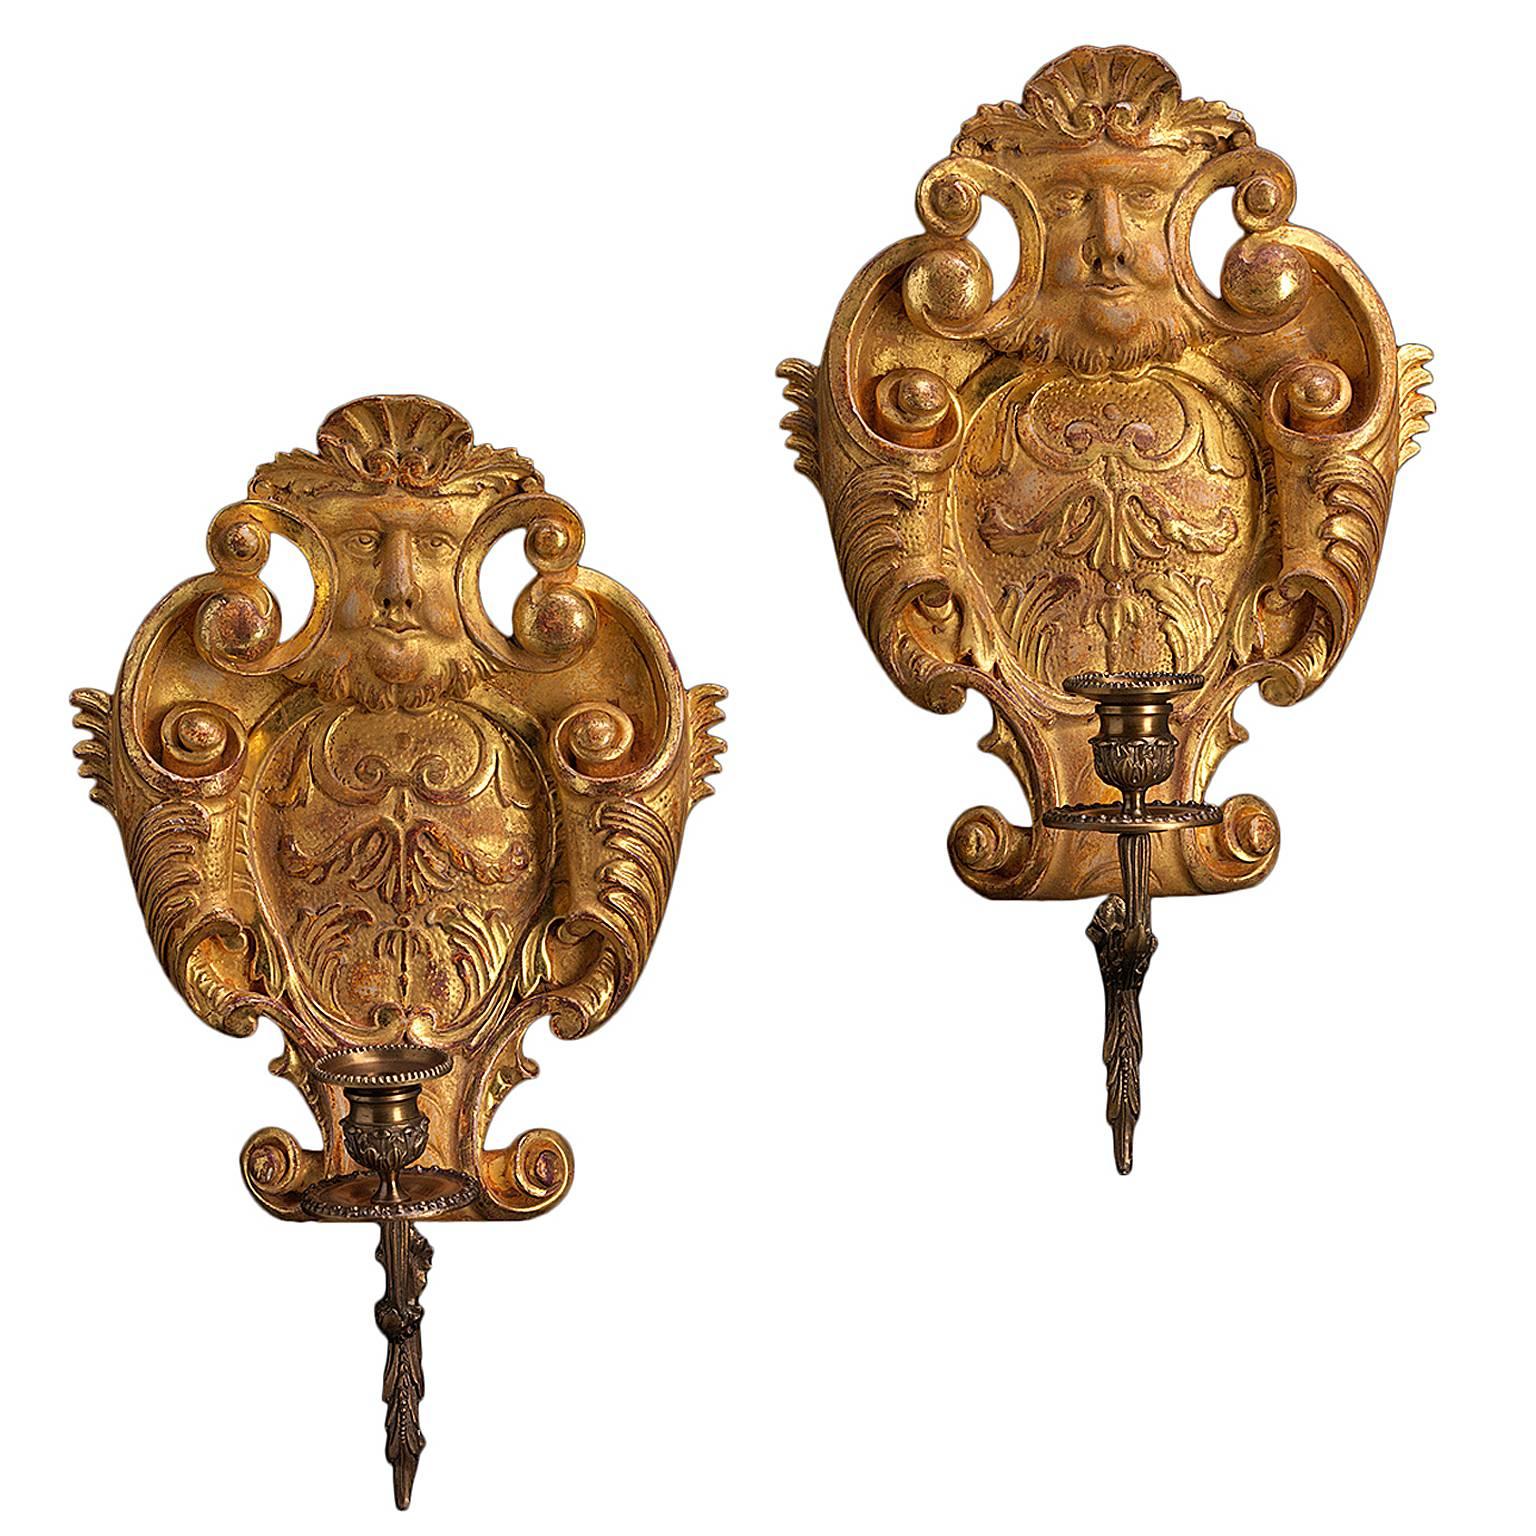 Cartouche Wall Lights in the George II manner